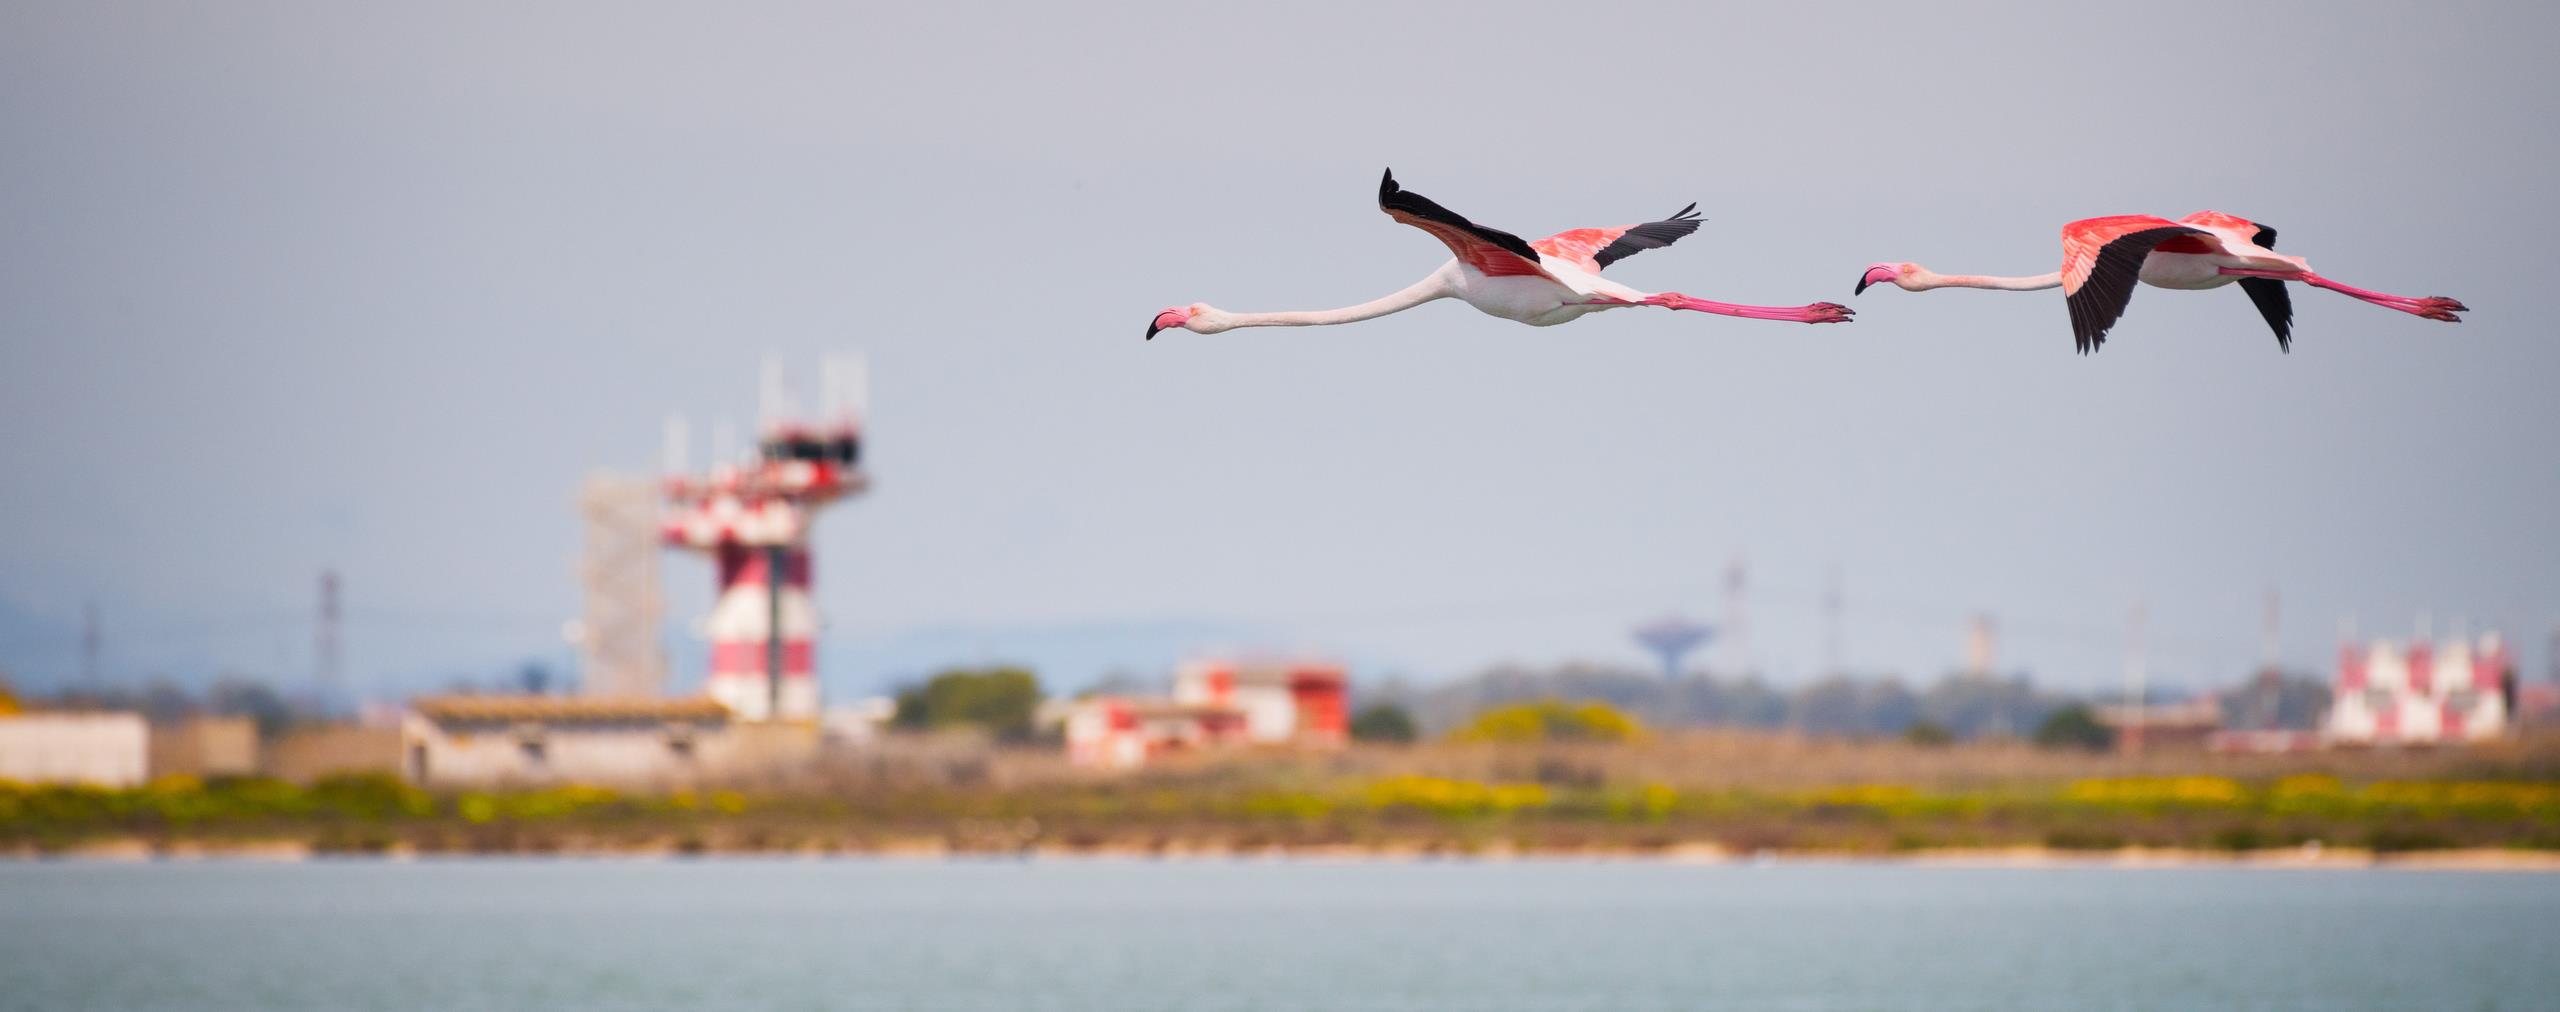 Flamingos flying by an airport